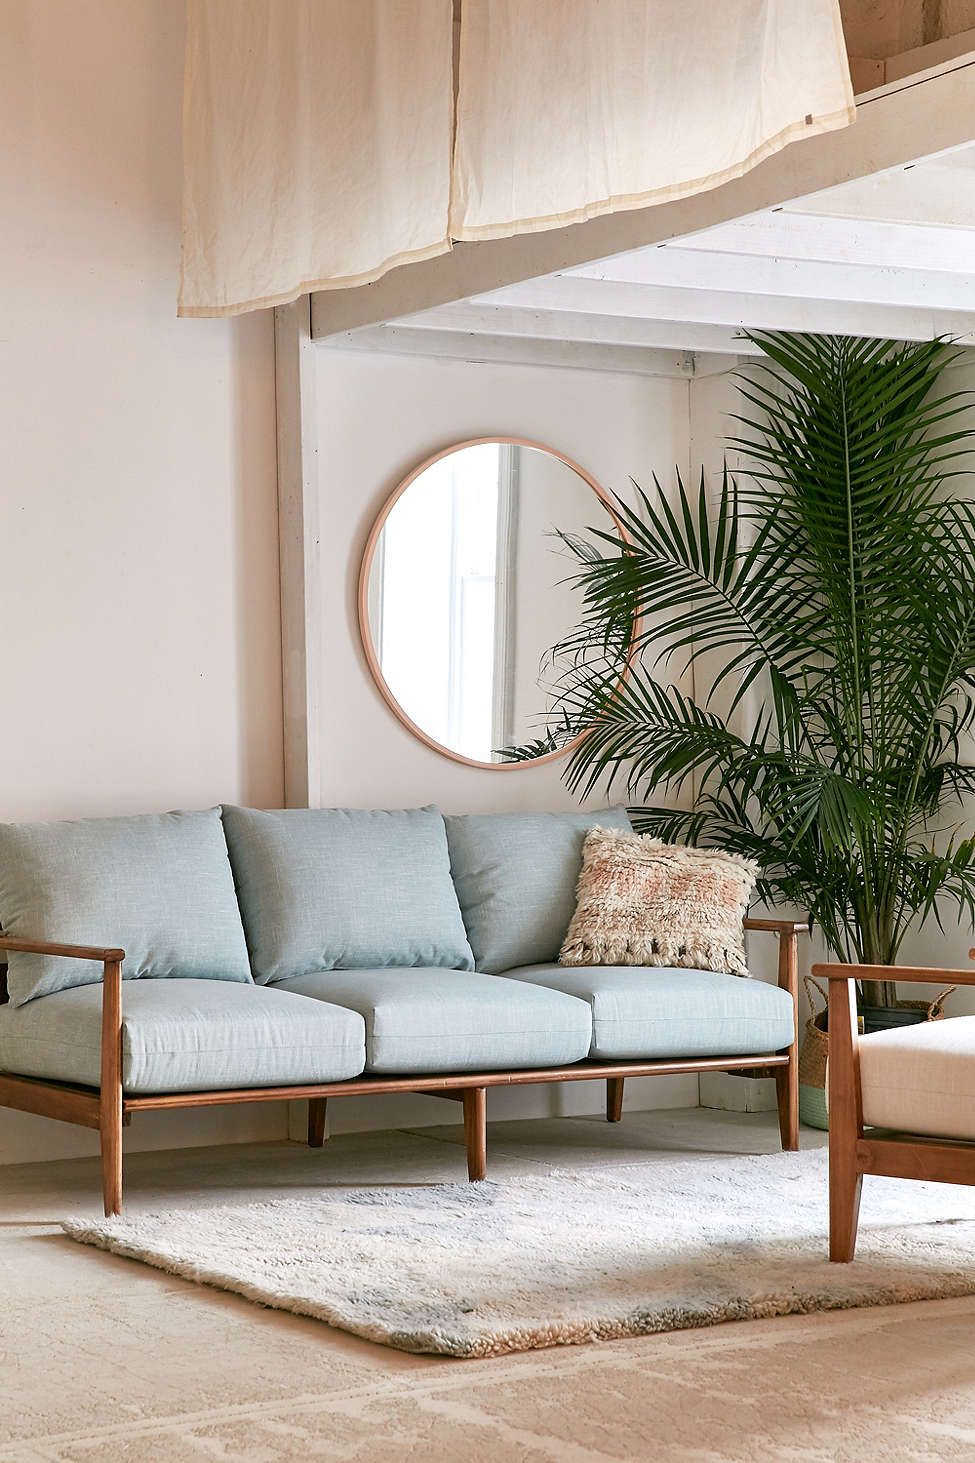 How to get affordable sofas that would
serve you well